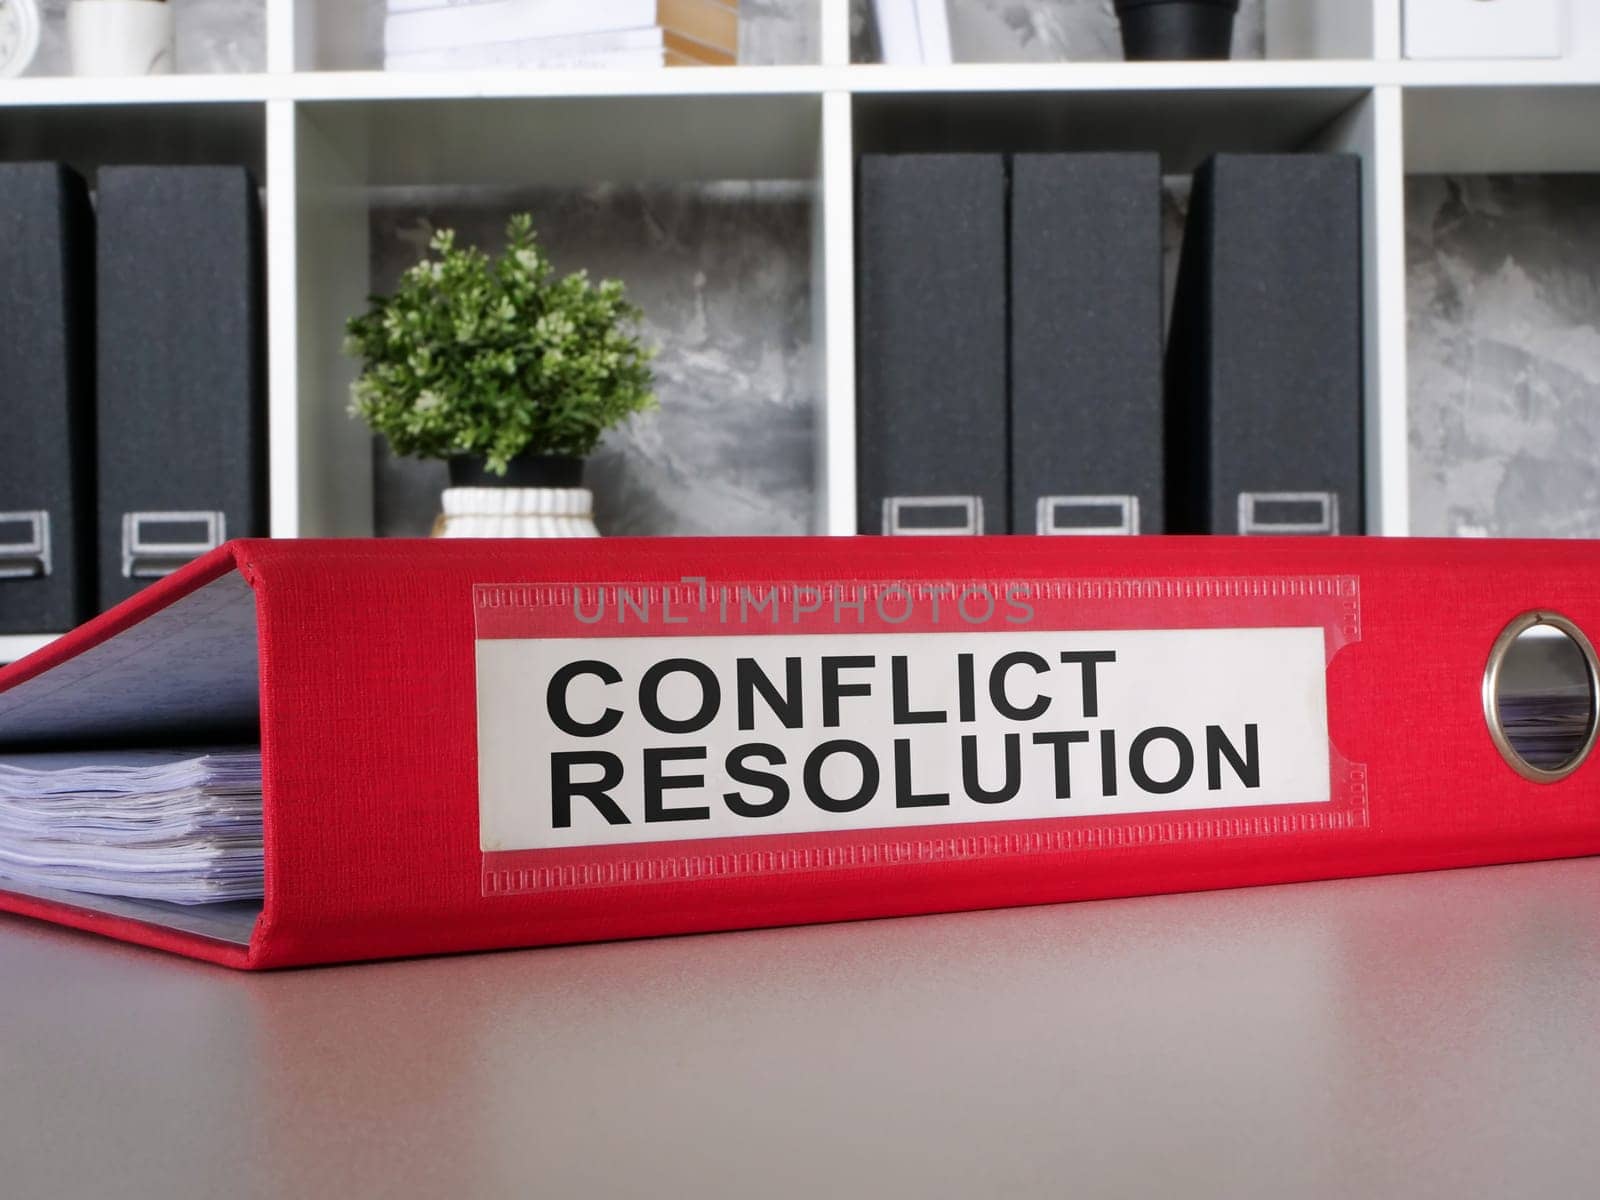 A folder with Conflict resolution documents.